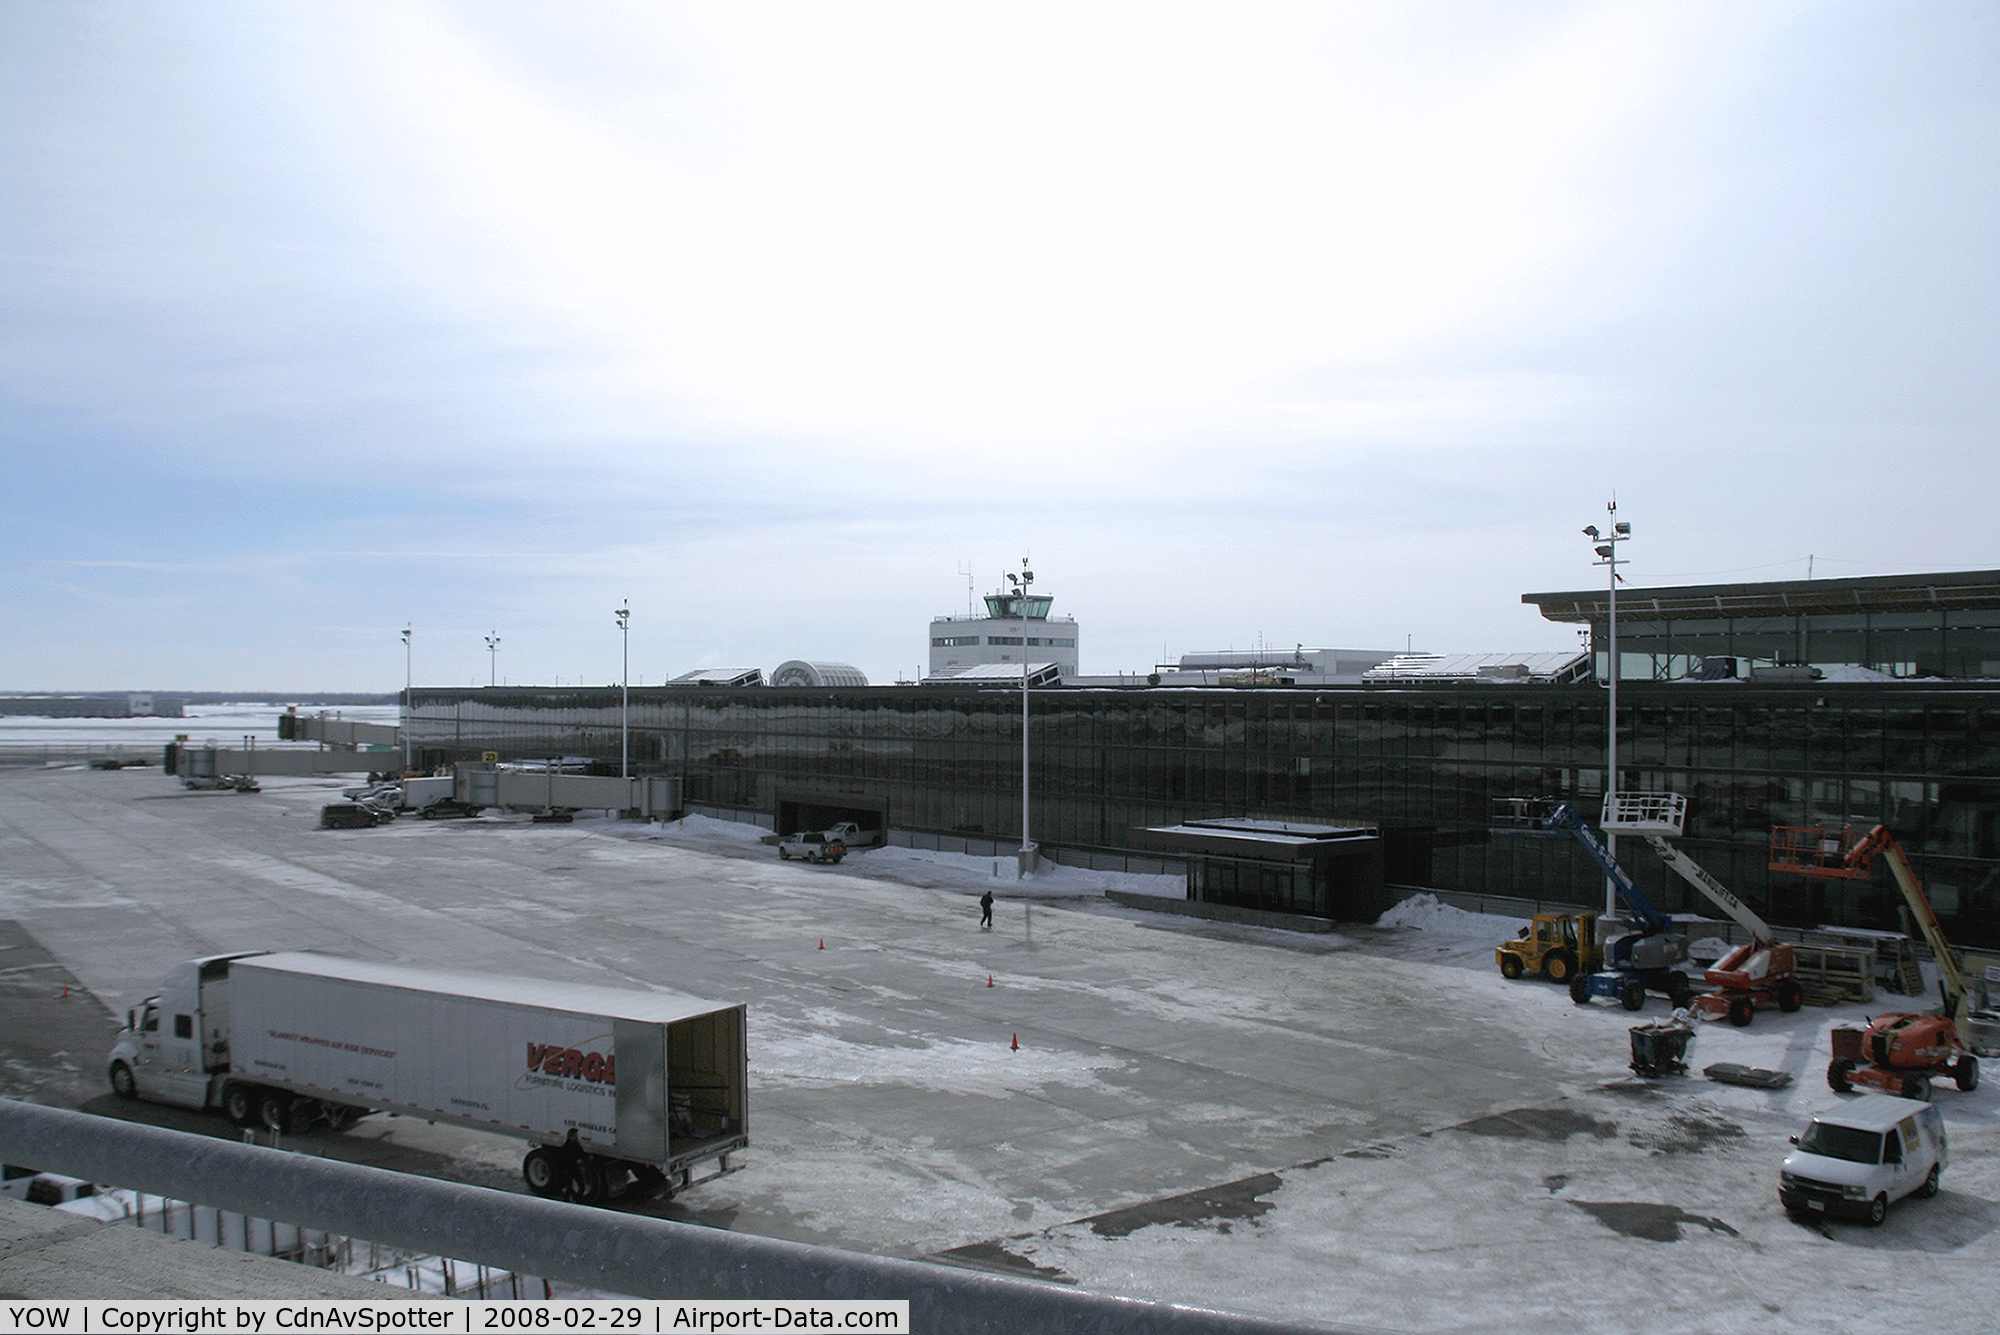 Ottawa Macdonald-Cartier International Airport (Macdonald-Cartier International Airport), Ottawa, Ontario Canada (YOW) - YOW Phase 2 Terminal Building almost completed - due to Open March 13, 2008